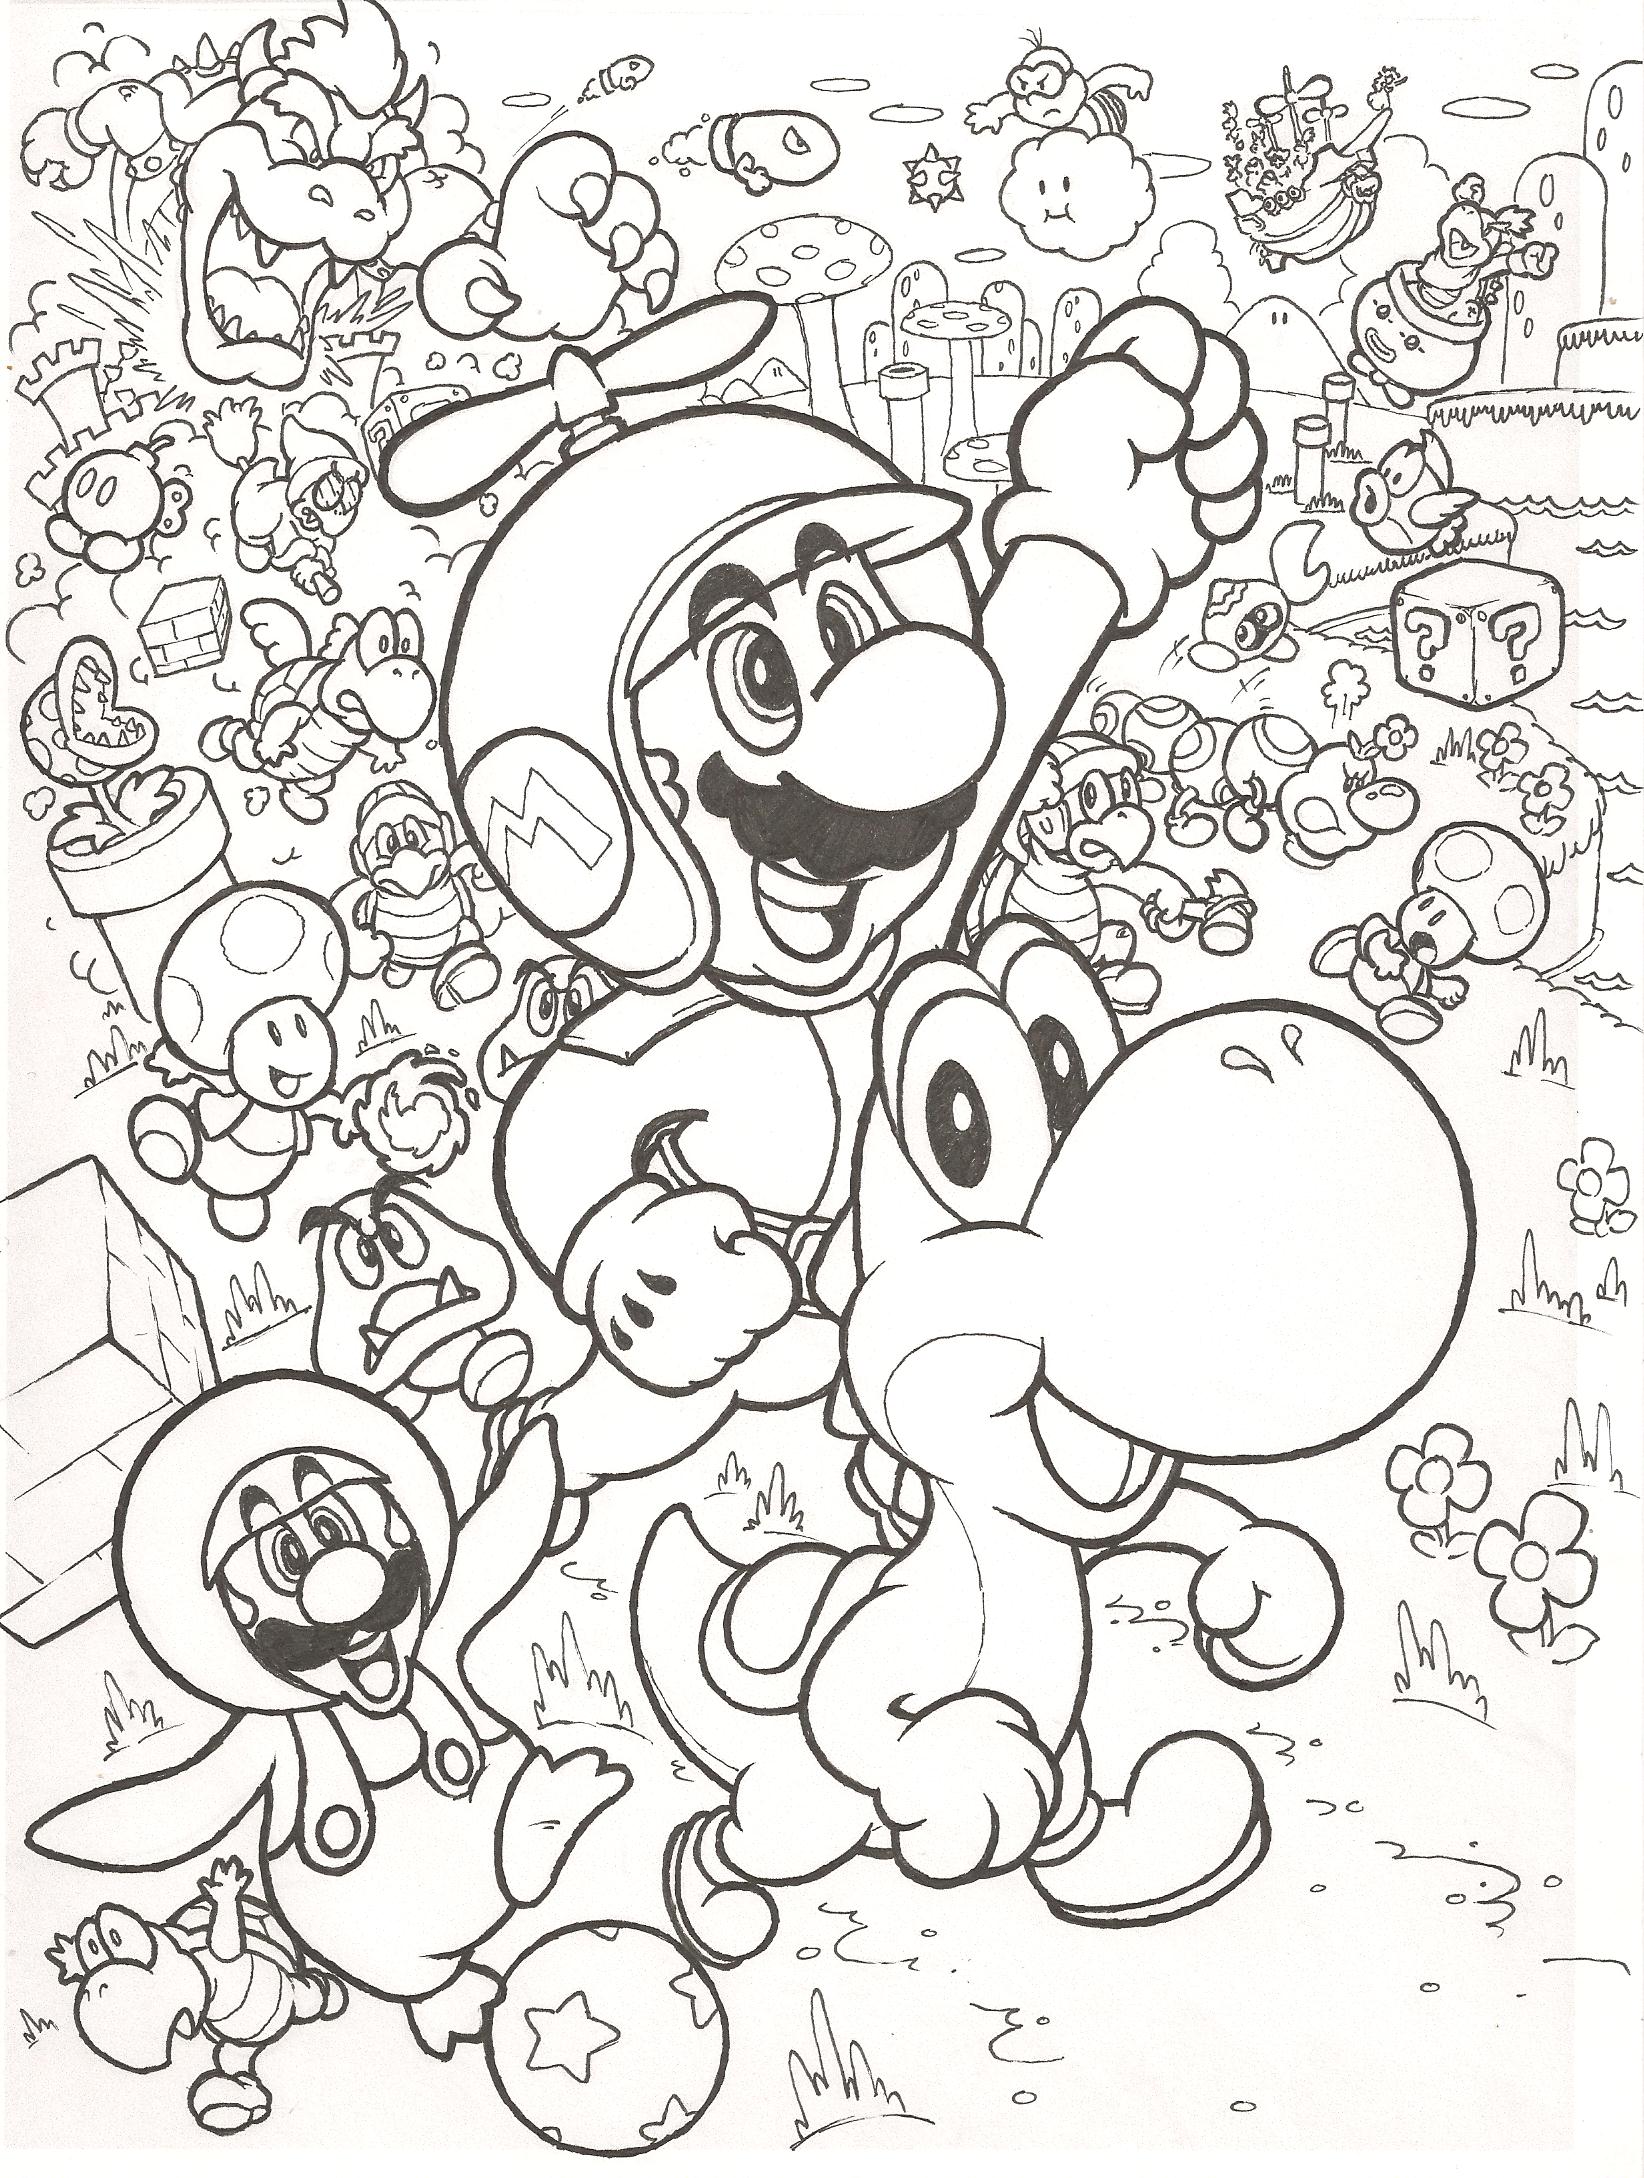 Super Mario Bros Wii Coloring Pages at GetColorings.com | Free ...